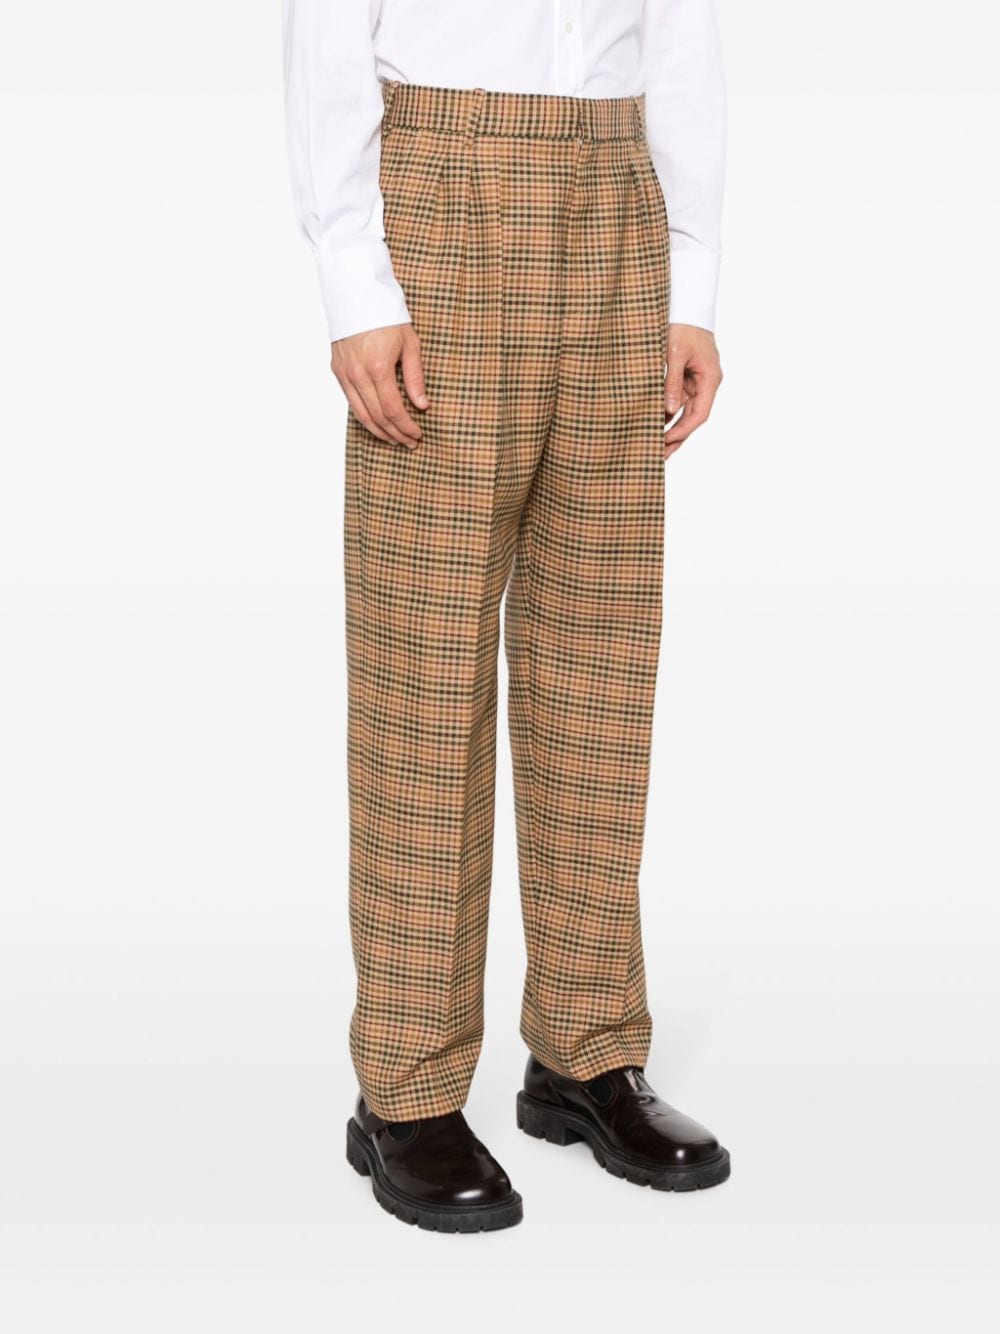 KENZO Sophisticated Tailored Pants in Dark Camel for Men - SS24 Collection